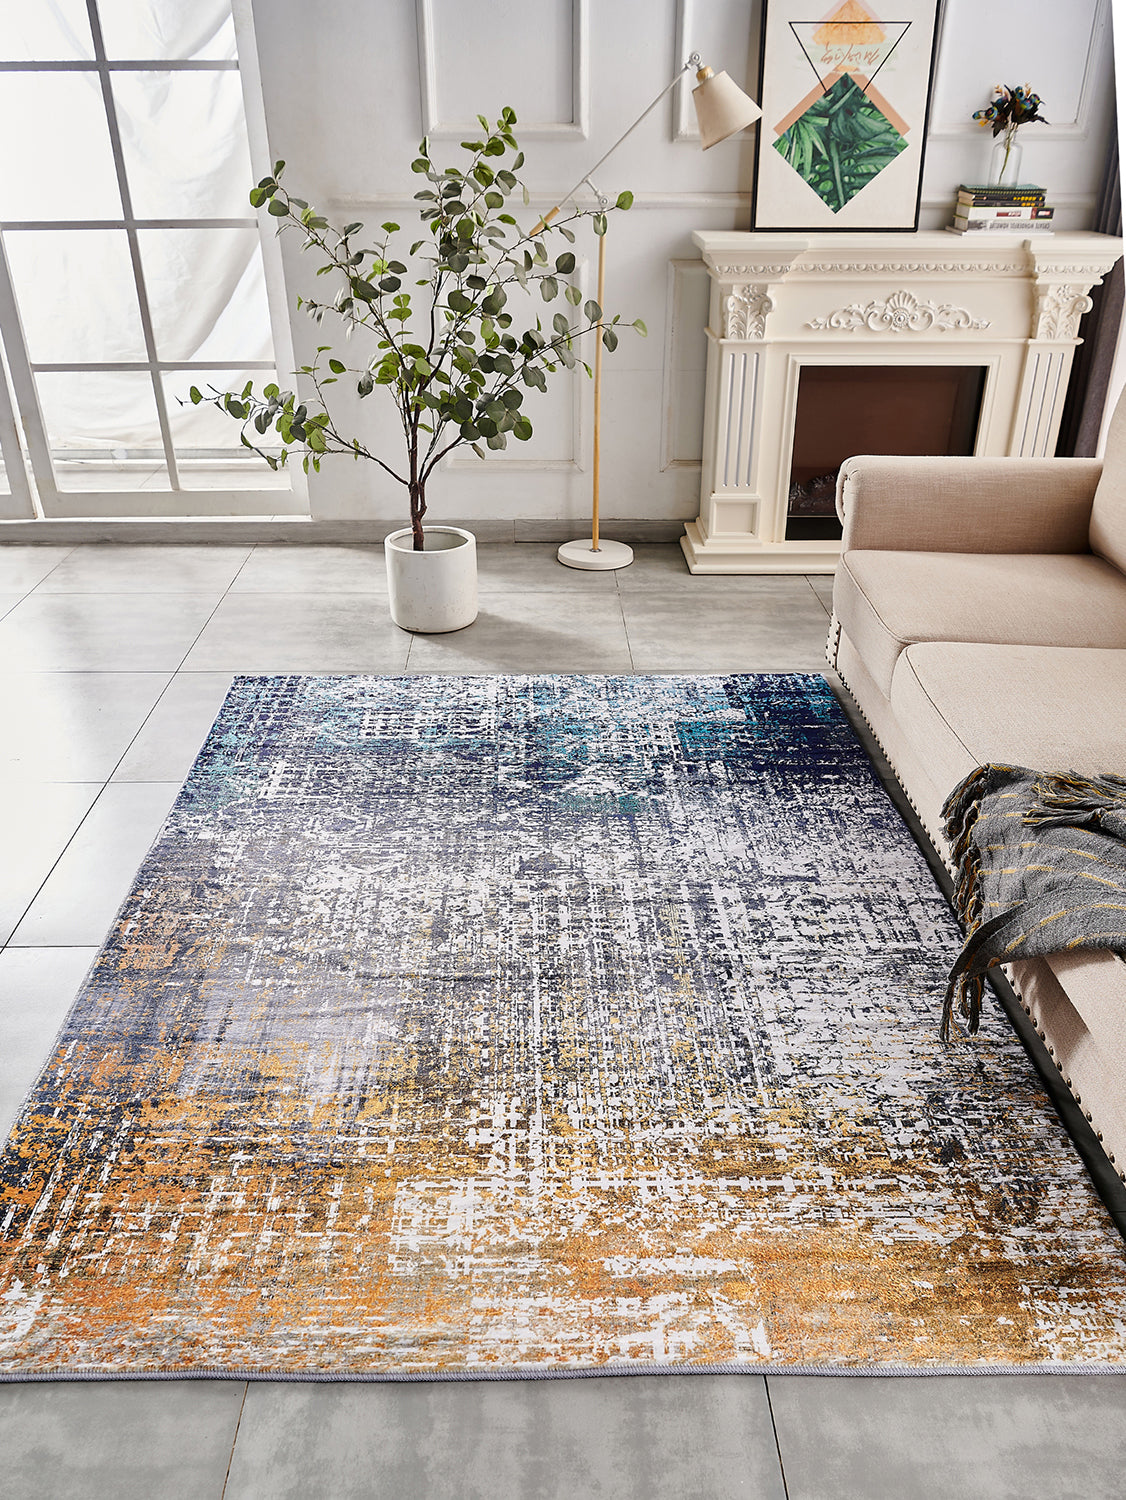 ZARA Collection Abstract Design Turquoise Gray Rust Machine Washable Super Soft Area Rug